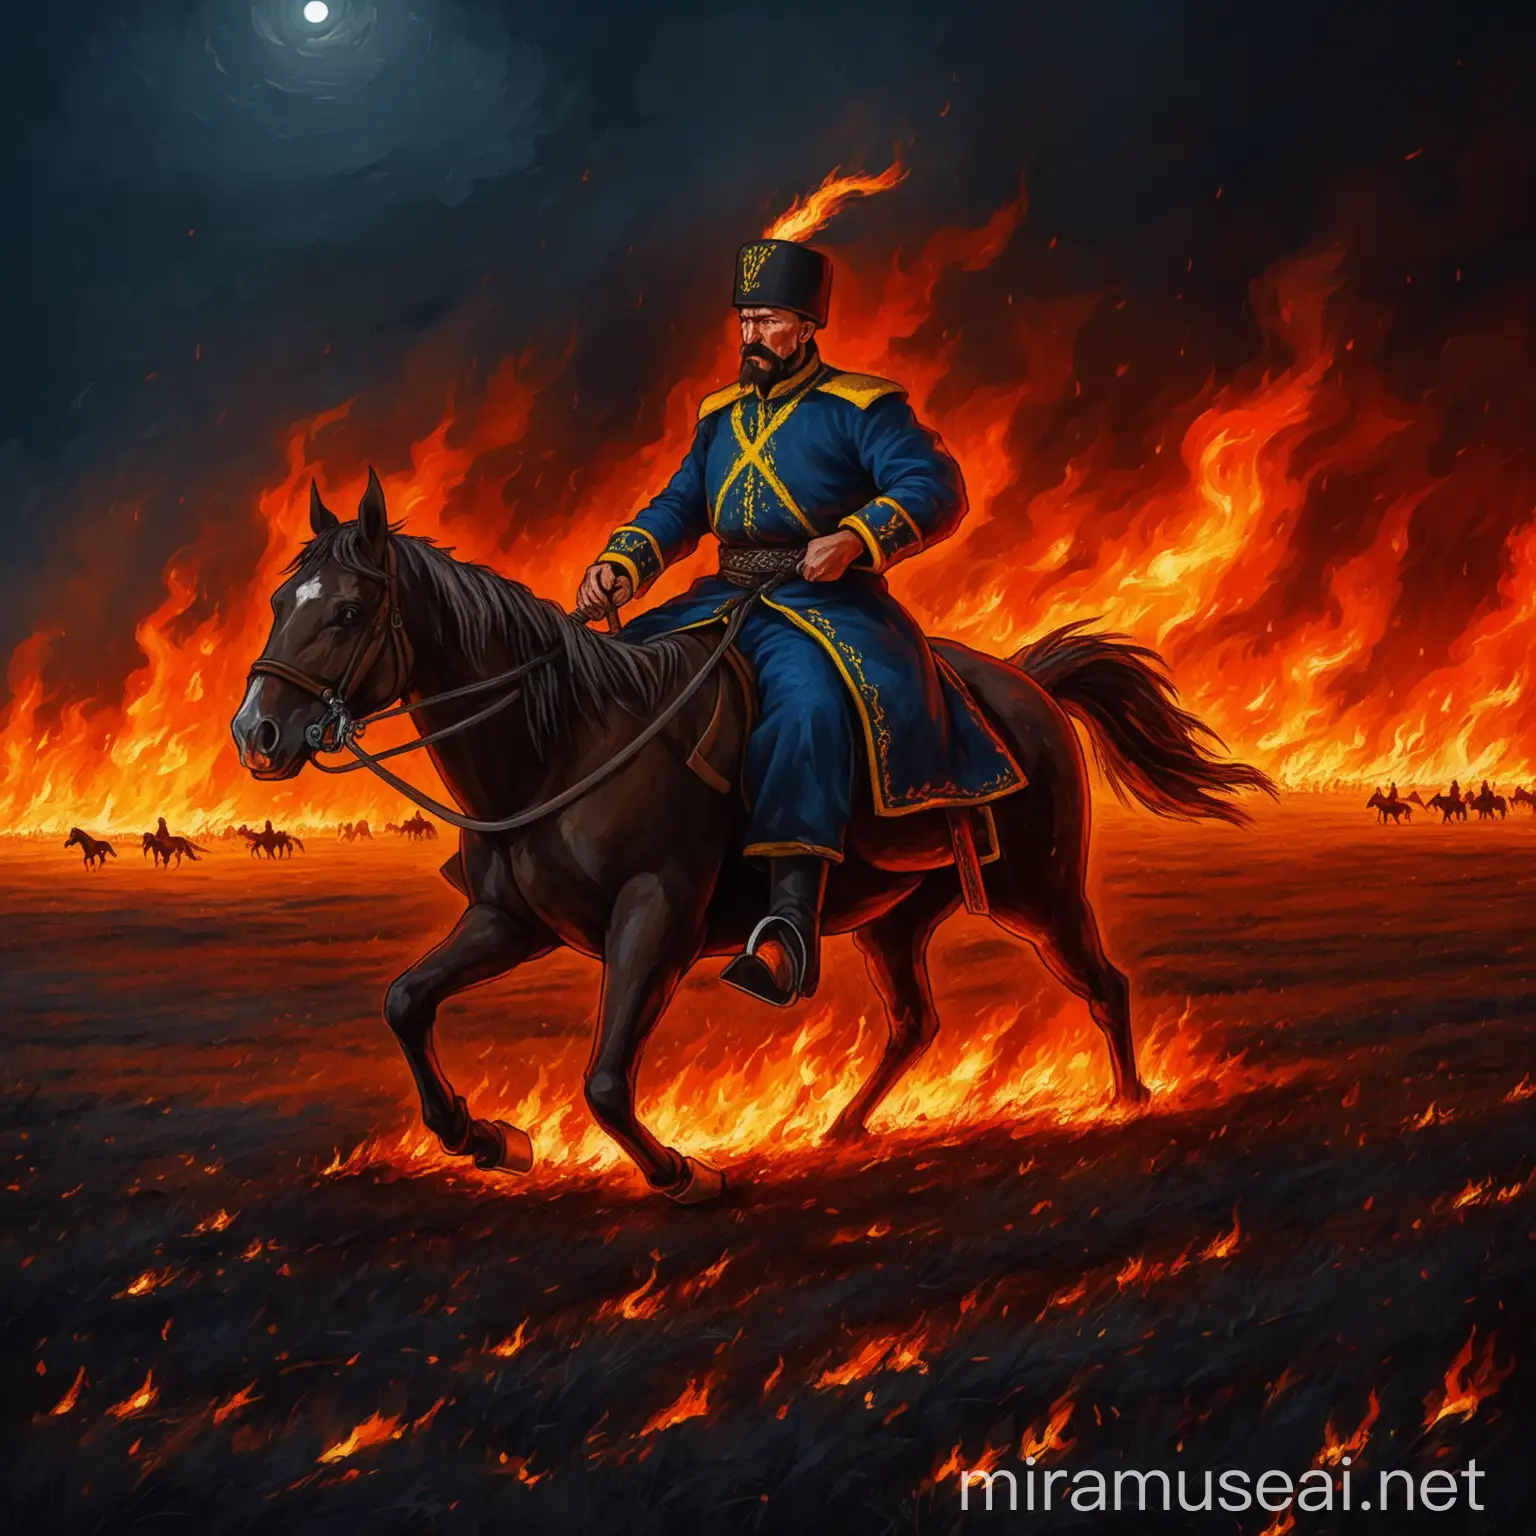 Ukrainian Cossack Riding a Fiery Steed in Nocturnal Phonk Ambiance